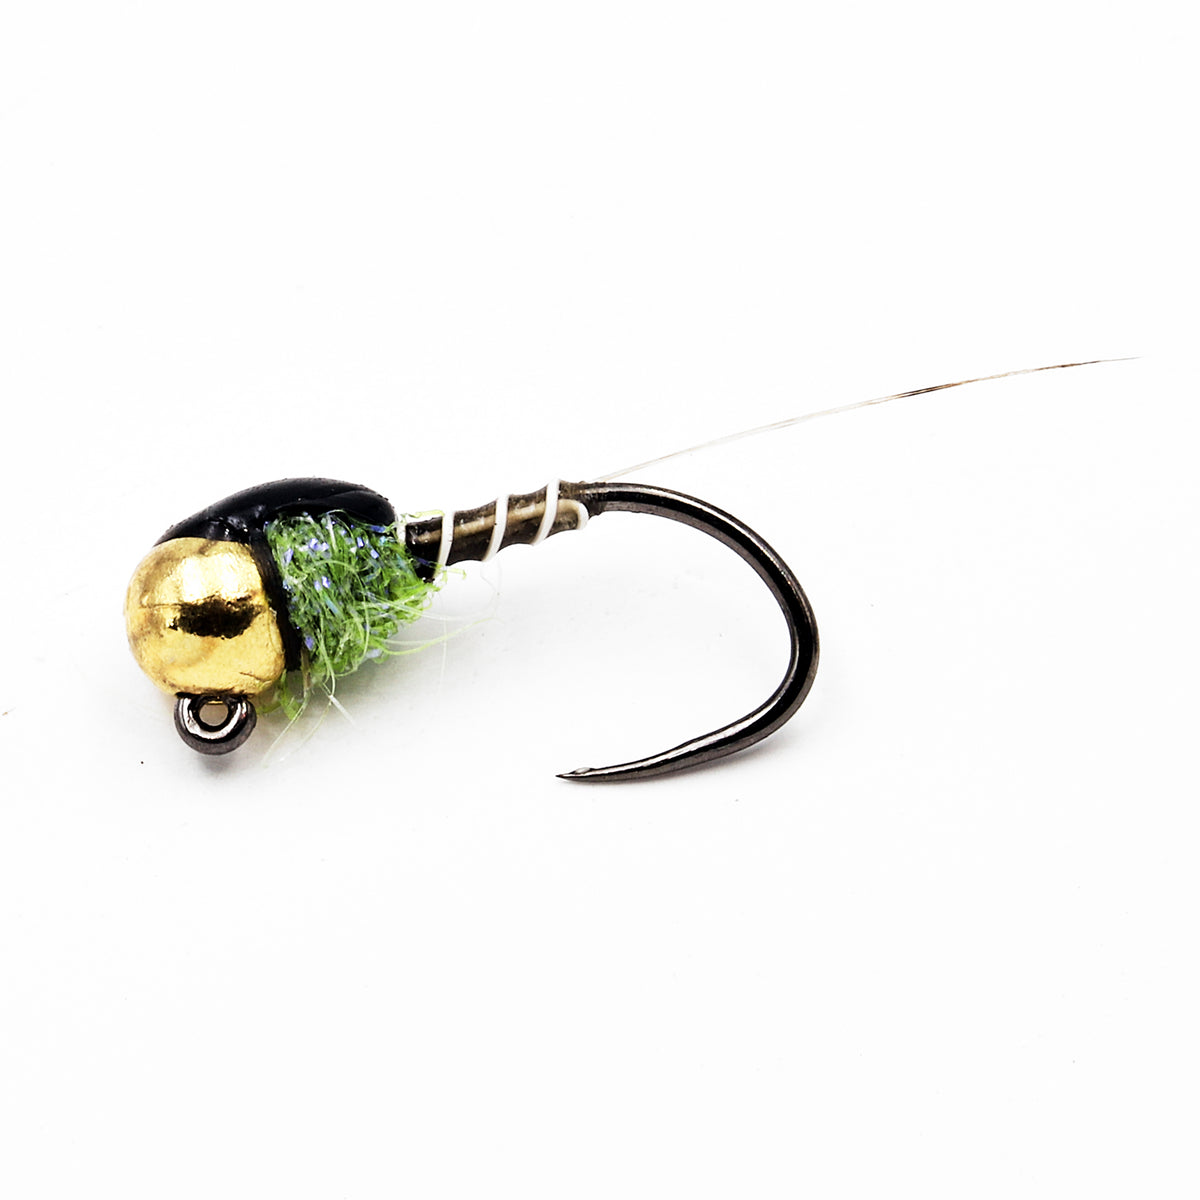 The Fly Fiend’s Olive Nymph (3 Pack)